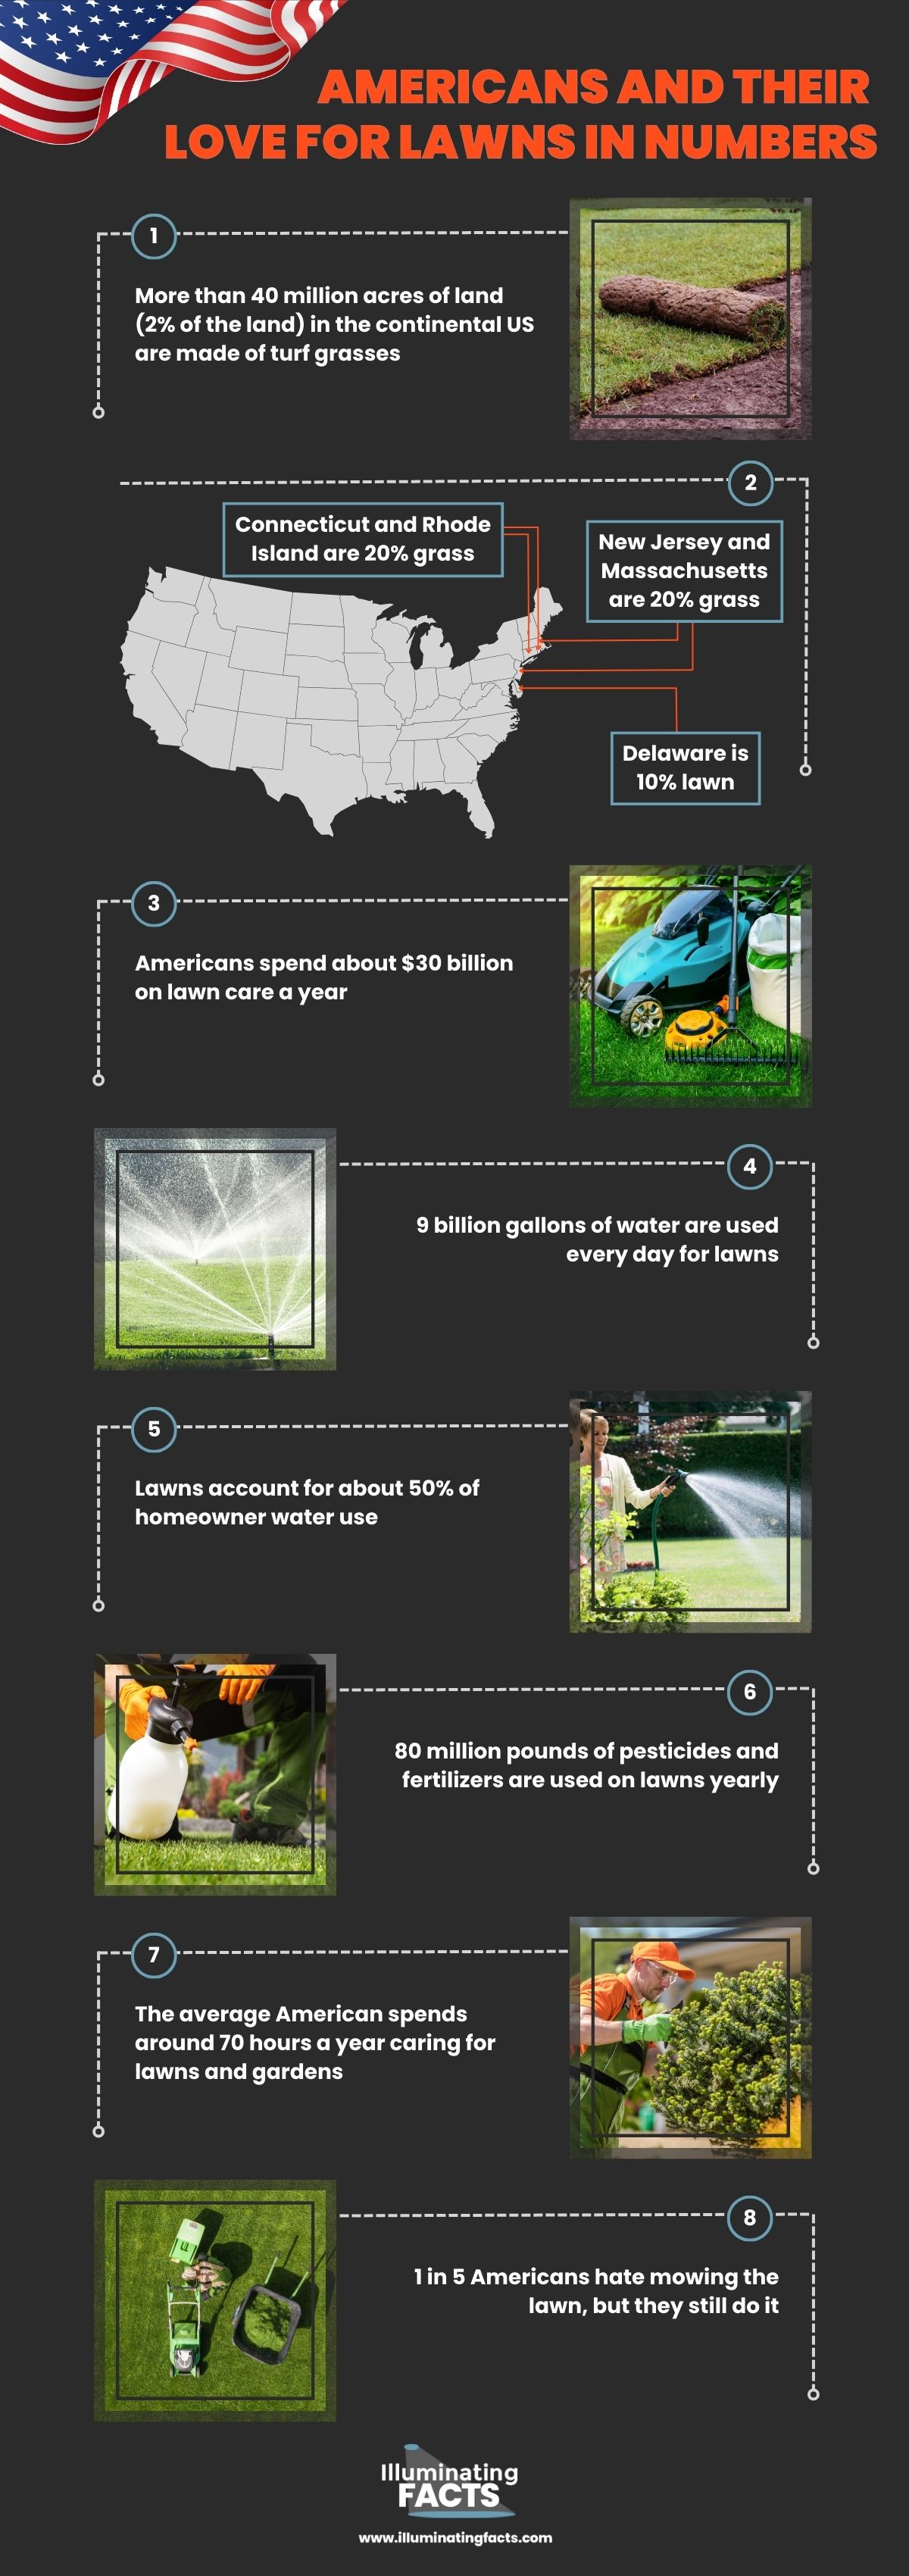 Americans and Their Love for Lawns in Numbers